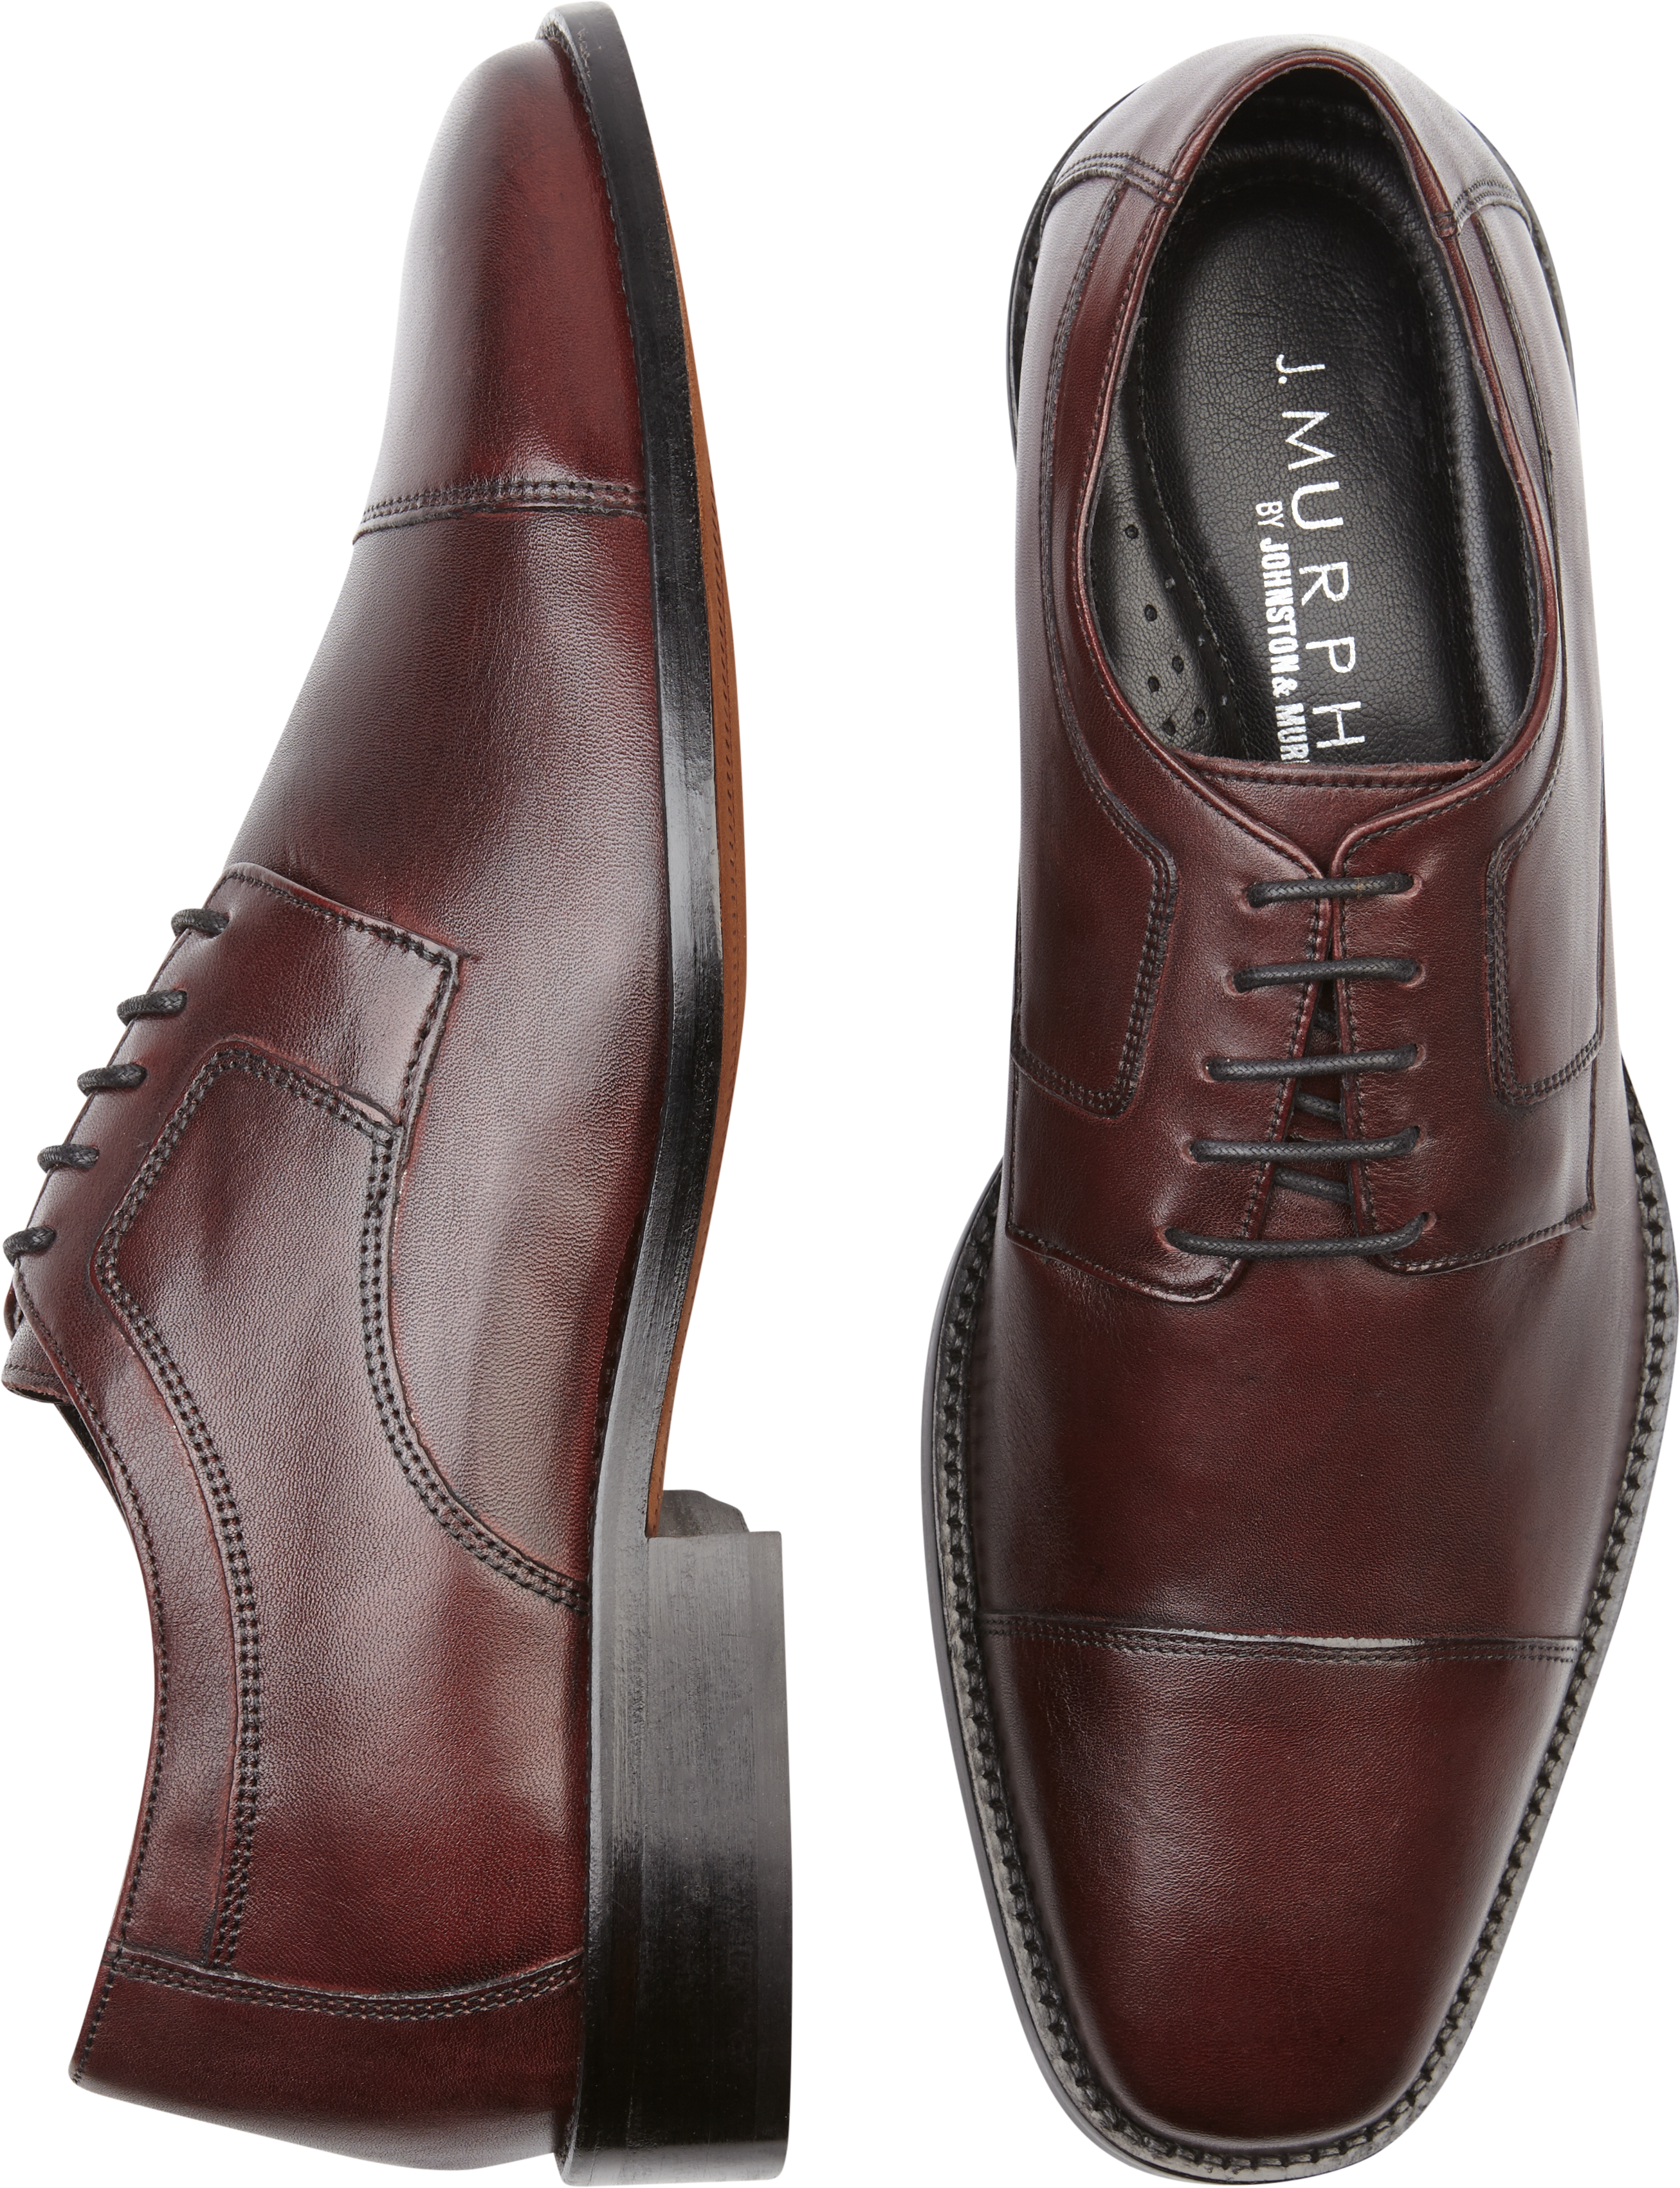 johnston murphy casual shoes,OFF 74 